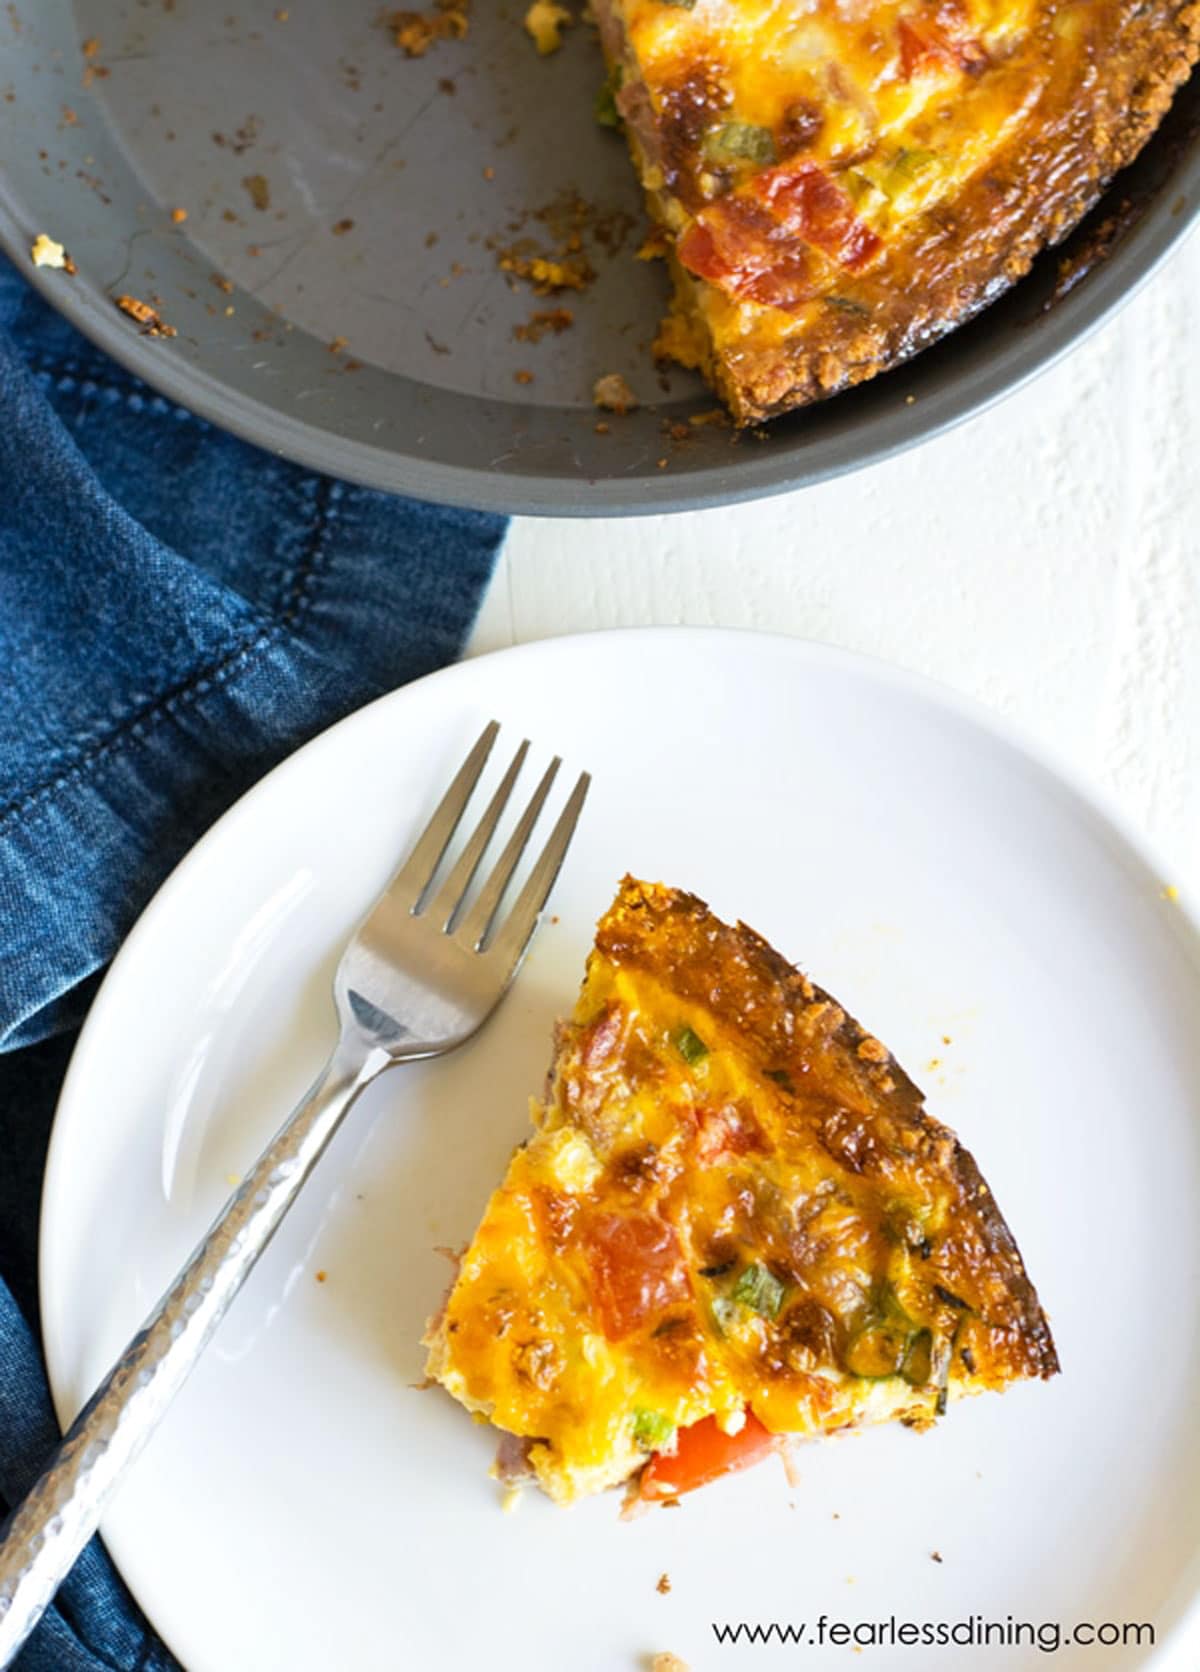 The top view of a slice of quiche on a plate next to the whole quiche.